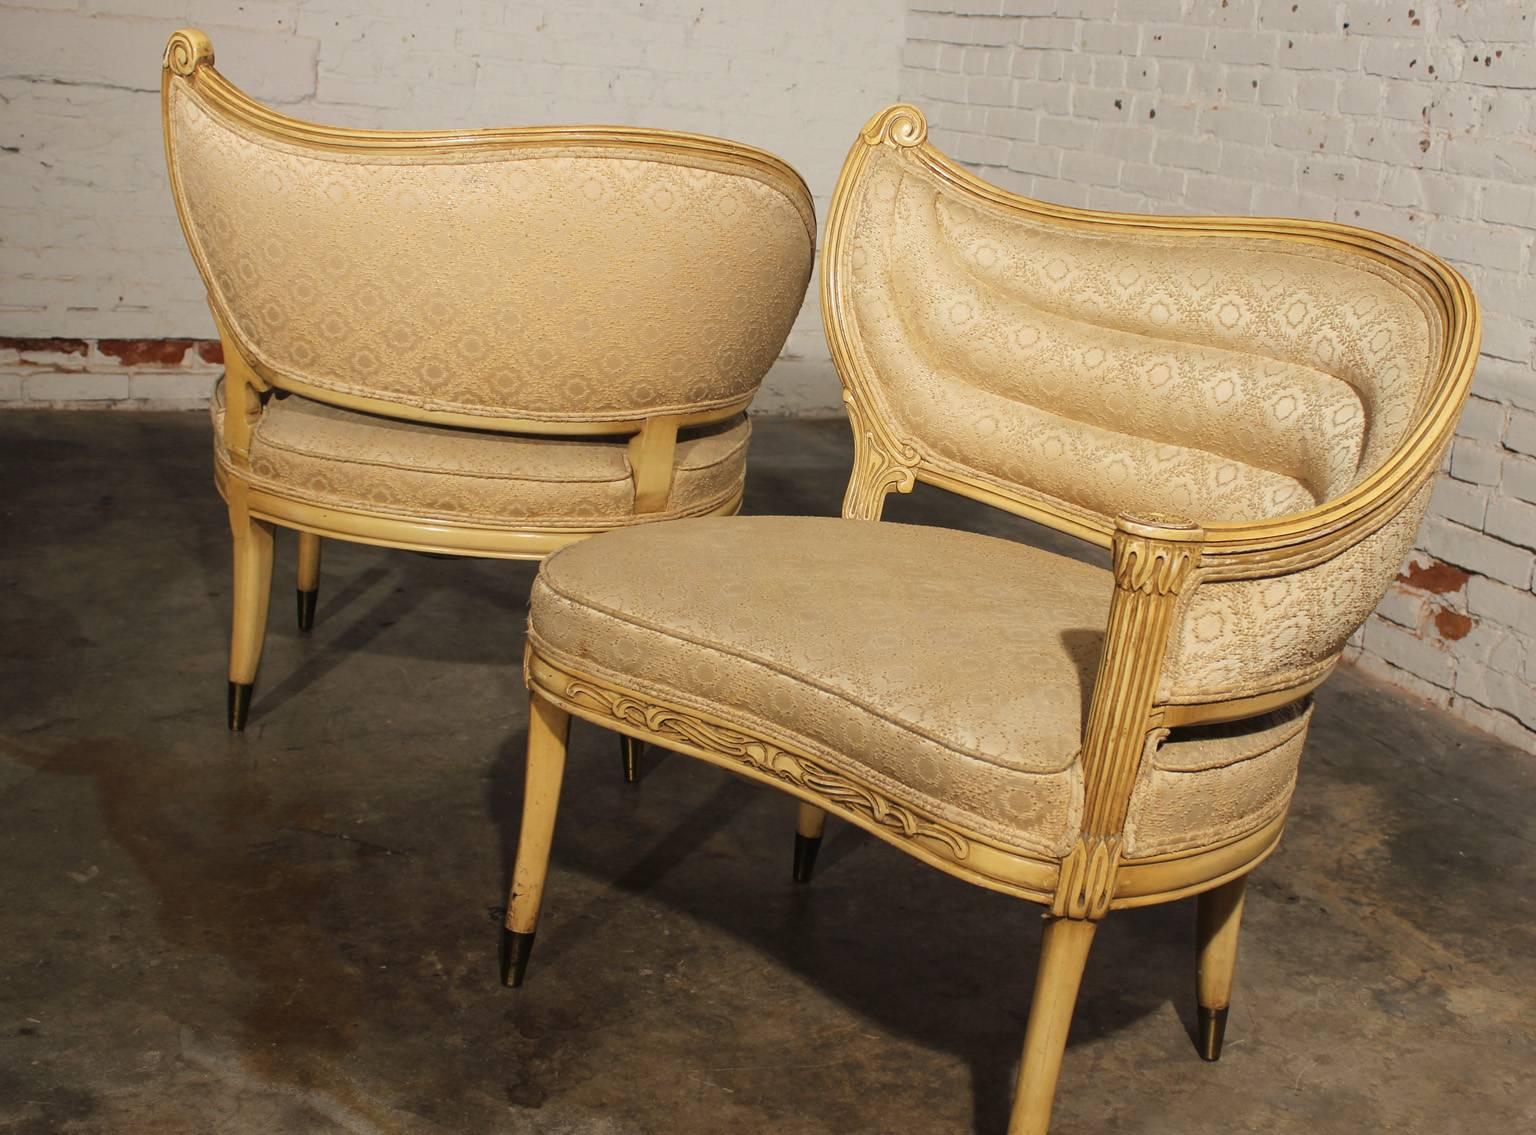 Pair of vintage Hollywood Regency one-armed chairs by the Price Howard Furniture Company of Kansas City, Mo. In great vintage condition which gives them a great patina. Usable as is if you like a distressed look. Very sturdy. Very cool and